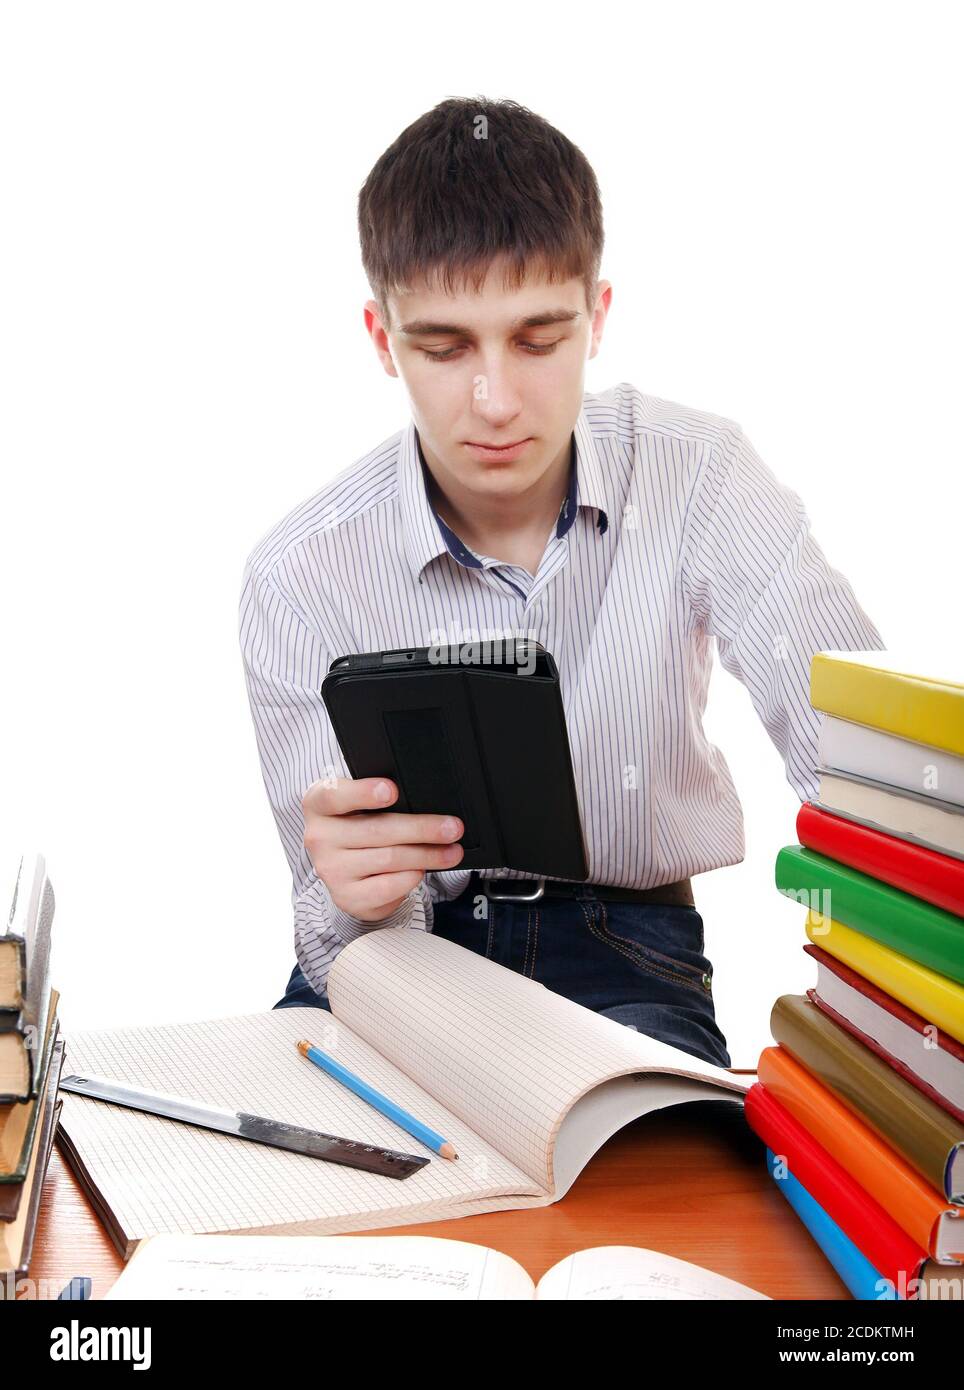 Student with Tablet Computer Stock Photo